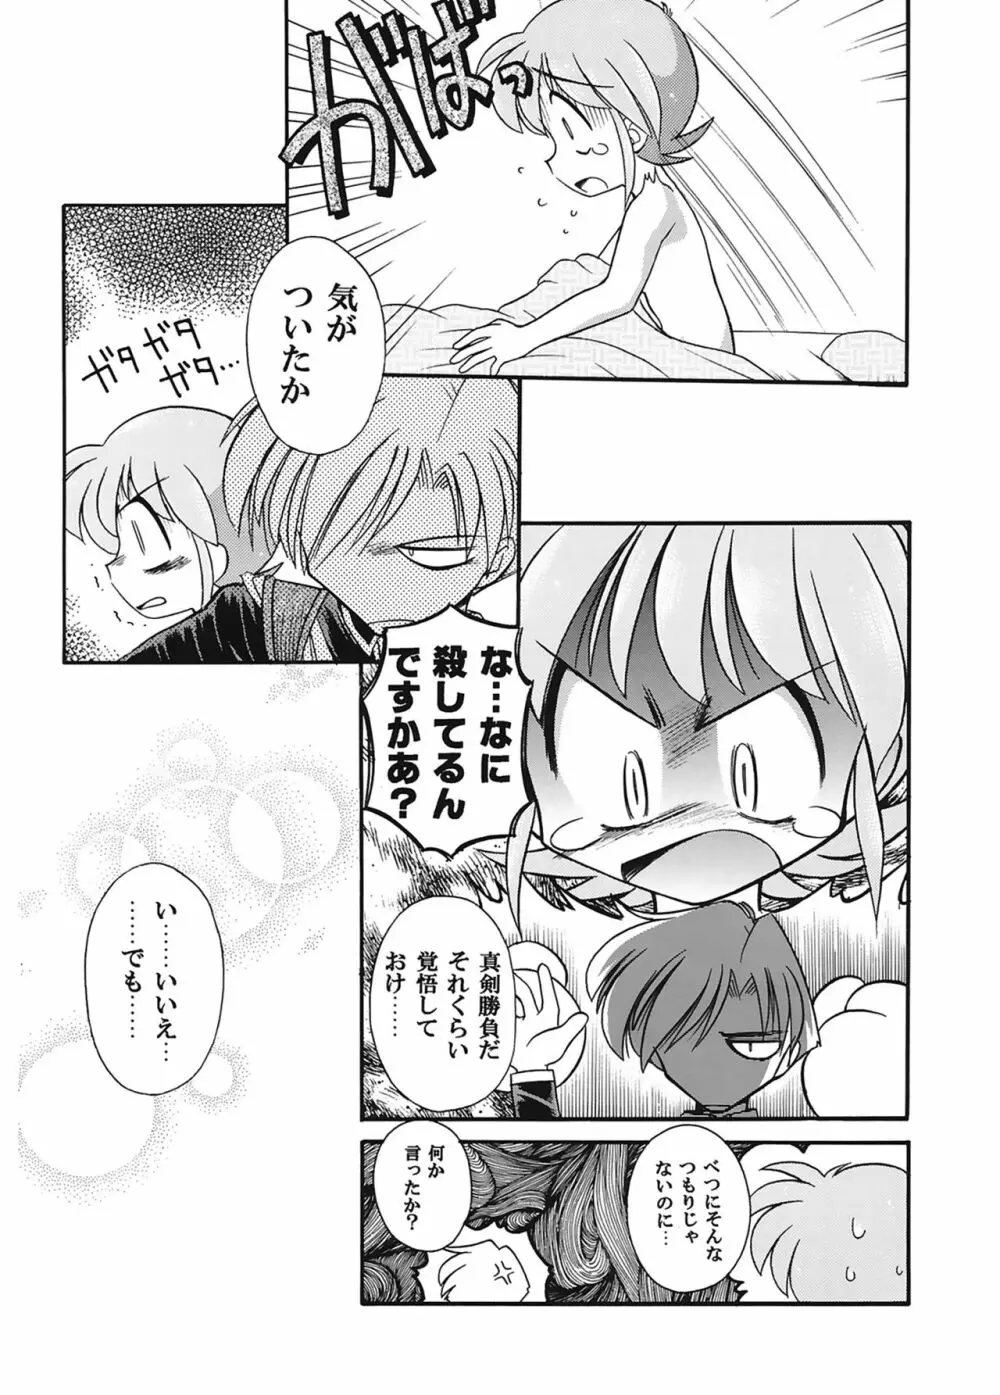 JACK UP featuring徳川玄徳 Page.209